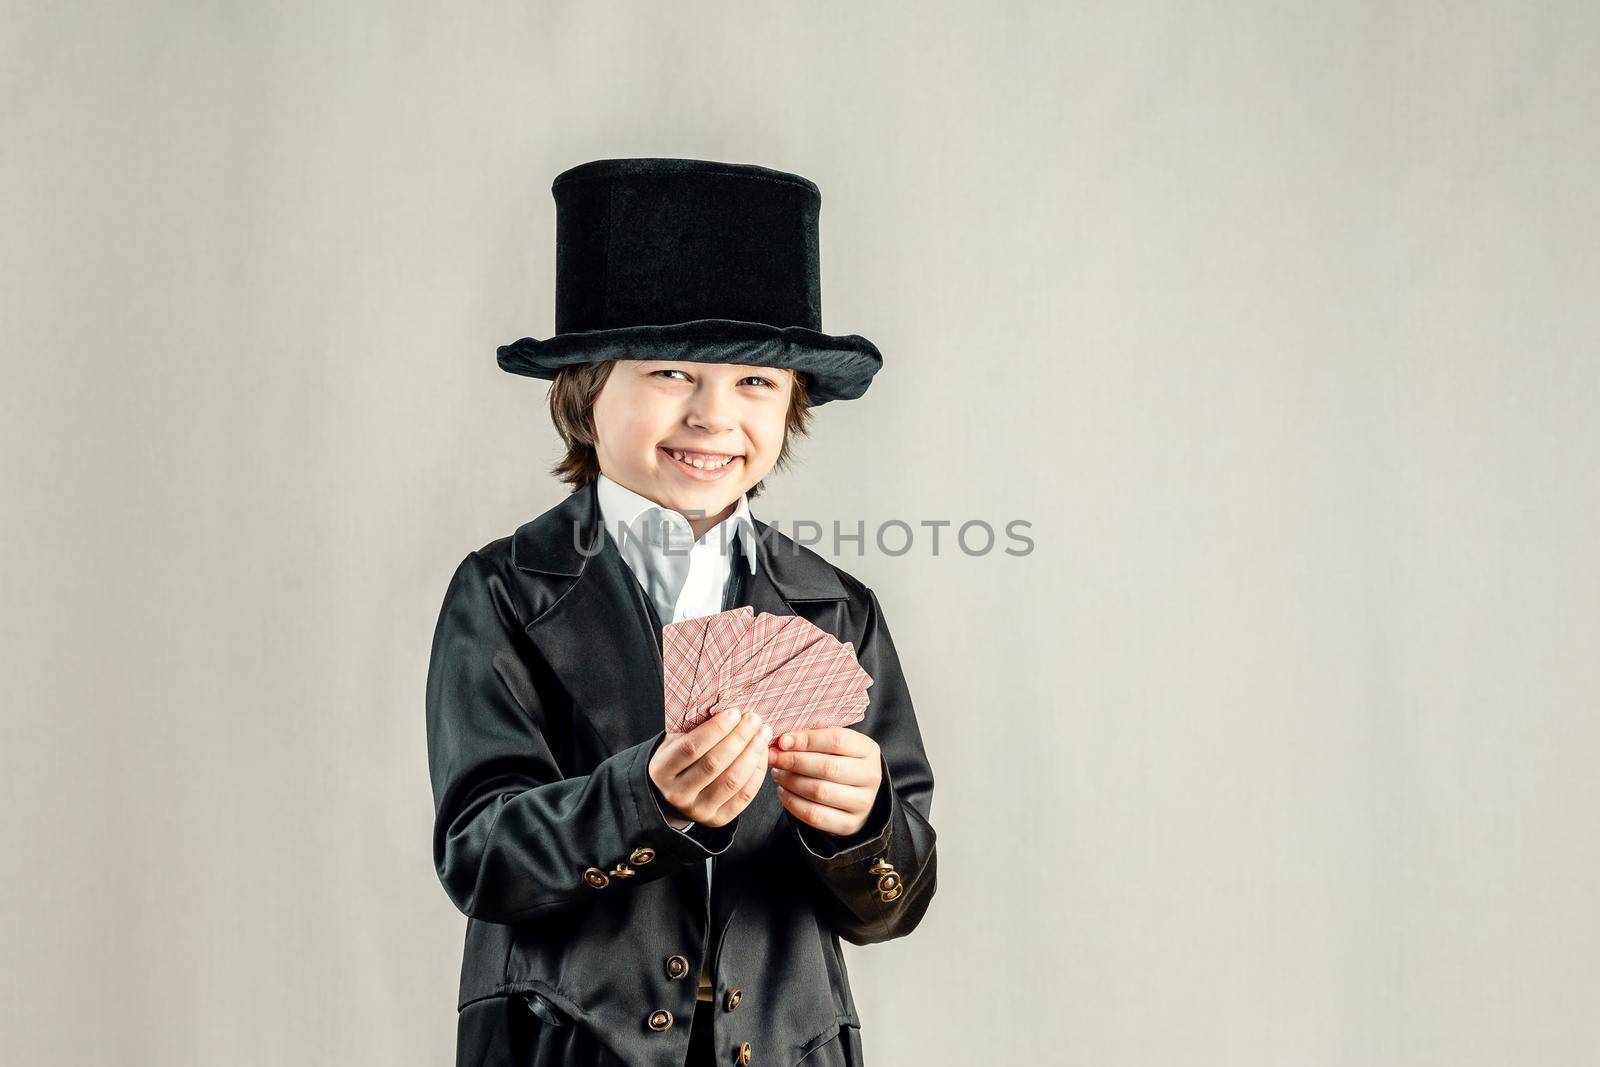 Young boy wearing black suit and a top hat by Syvanych